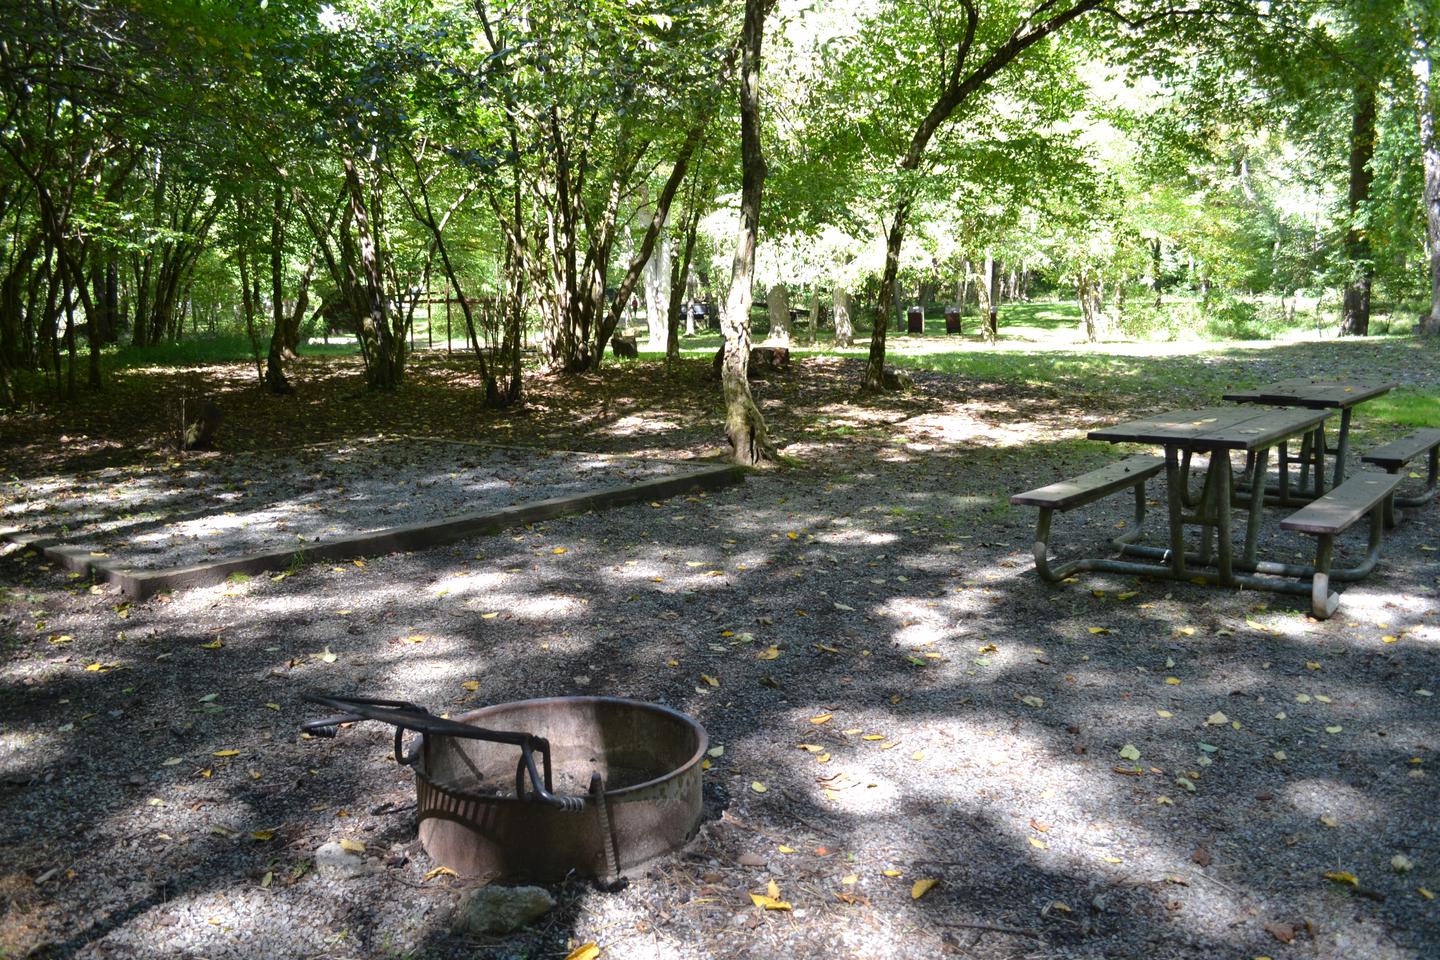 Site 2Tent pad, fire ring and picnic tables with horse stalls shown in background